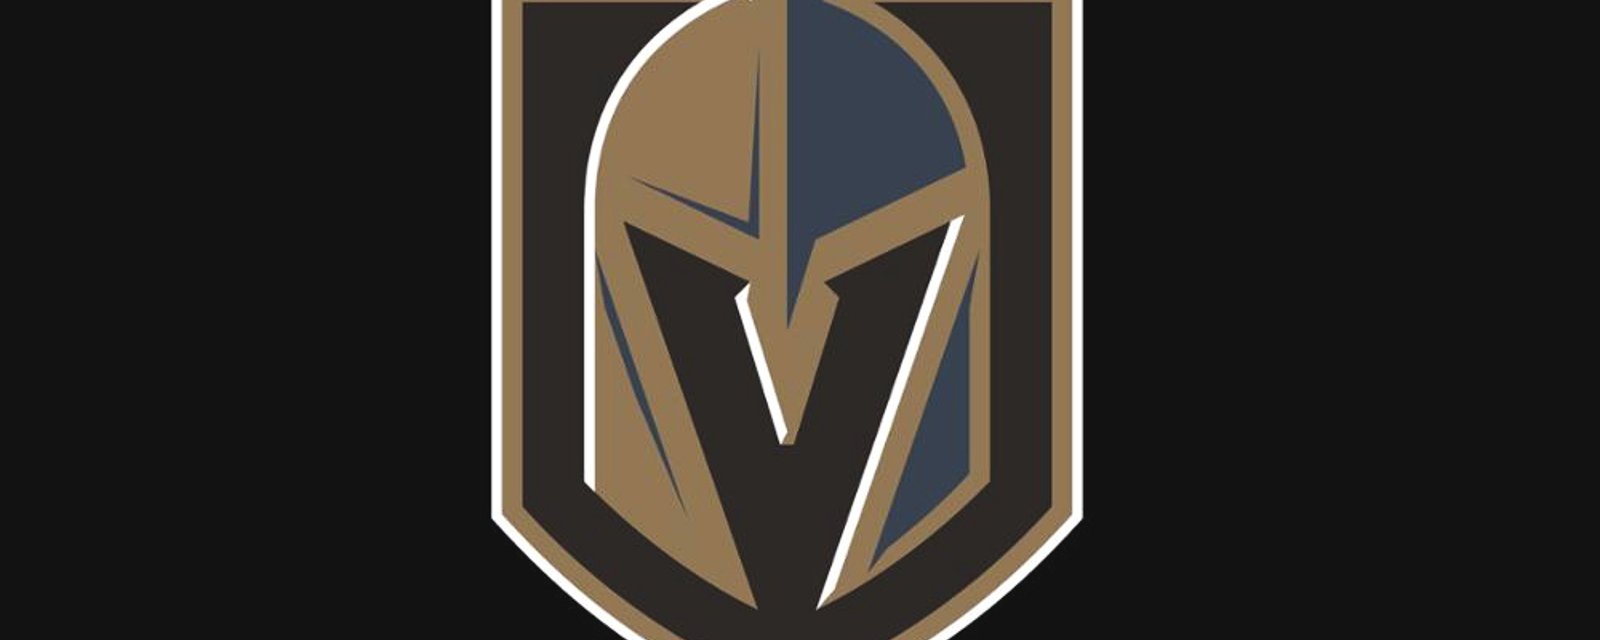 Breaking: Vegas Golden Knights have traded key center player! 